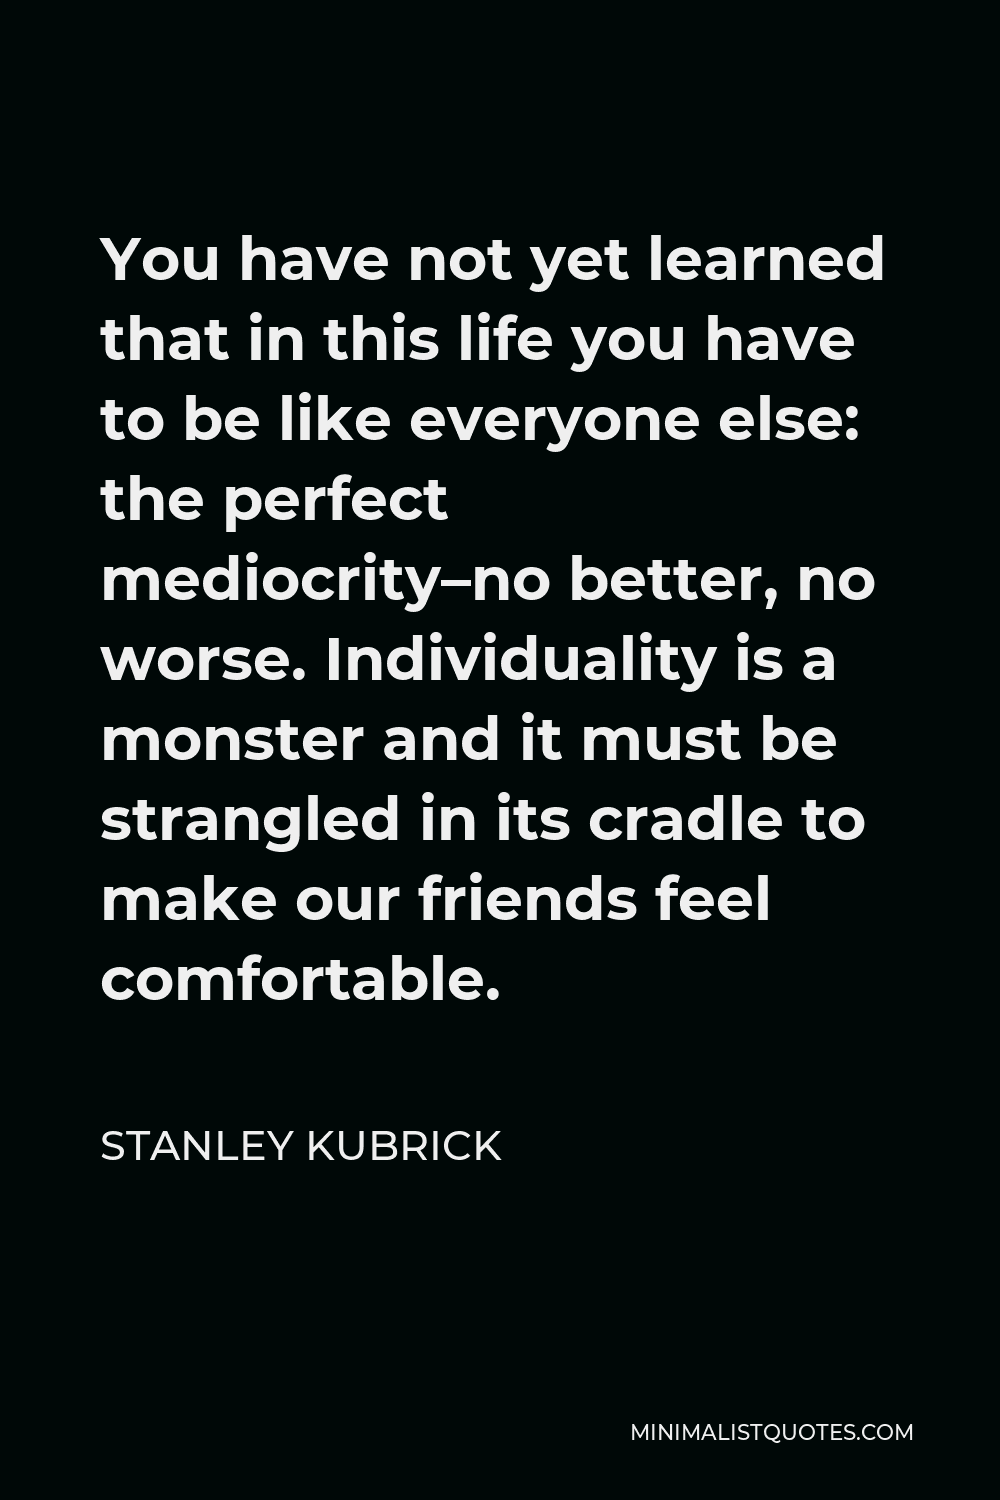 Stanley Kubrick Quote - You have not yet learned that in this life you have to be like everyone else: the perfect mediocrity–no better, no worse. Individuality is a monster and it must be strangled in its cradle to make our friends feel comfortable.